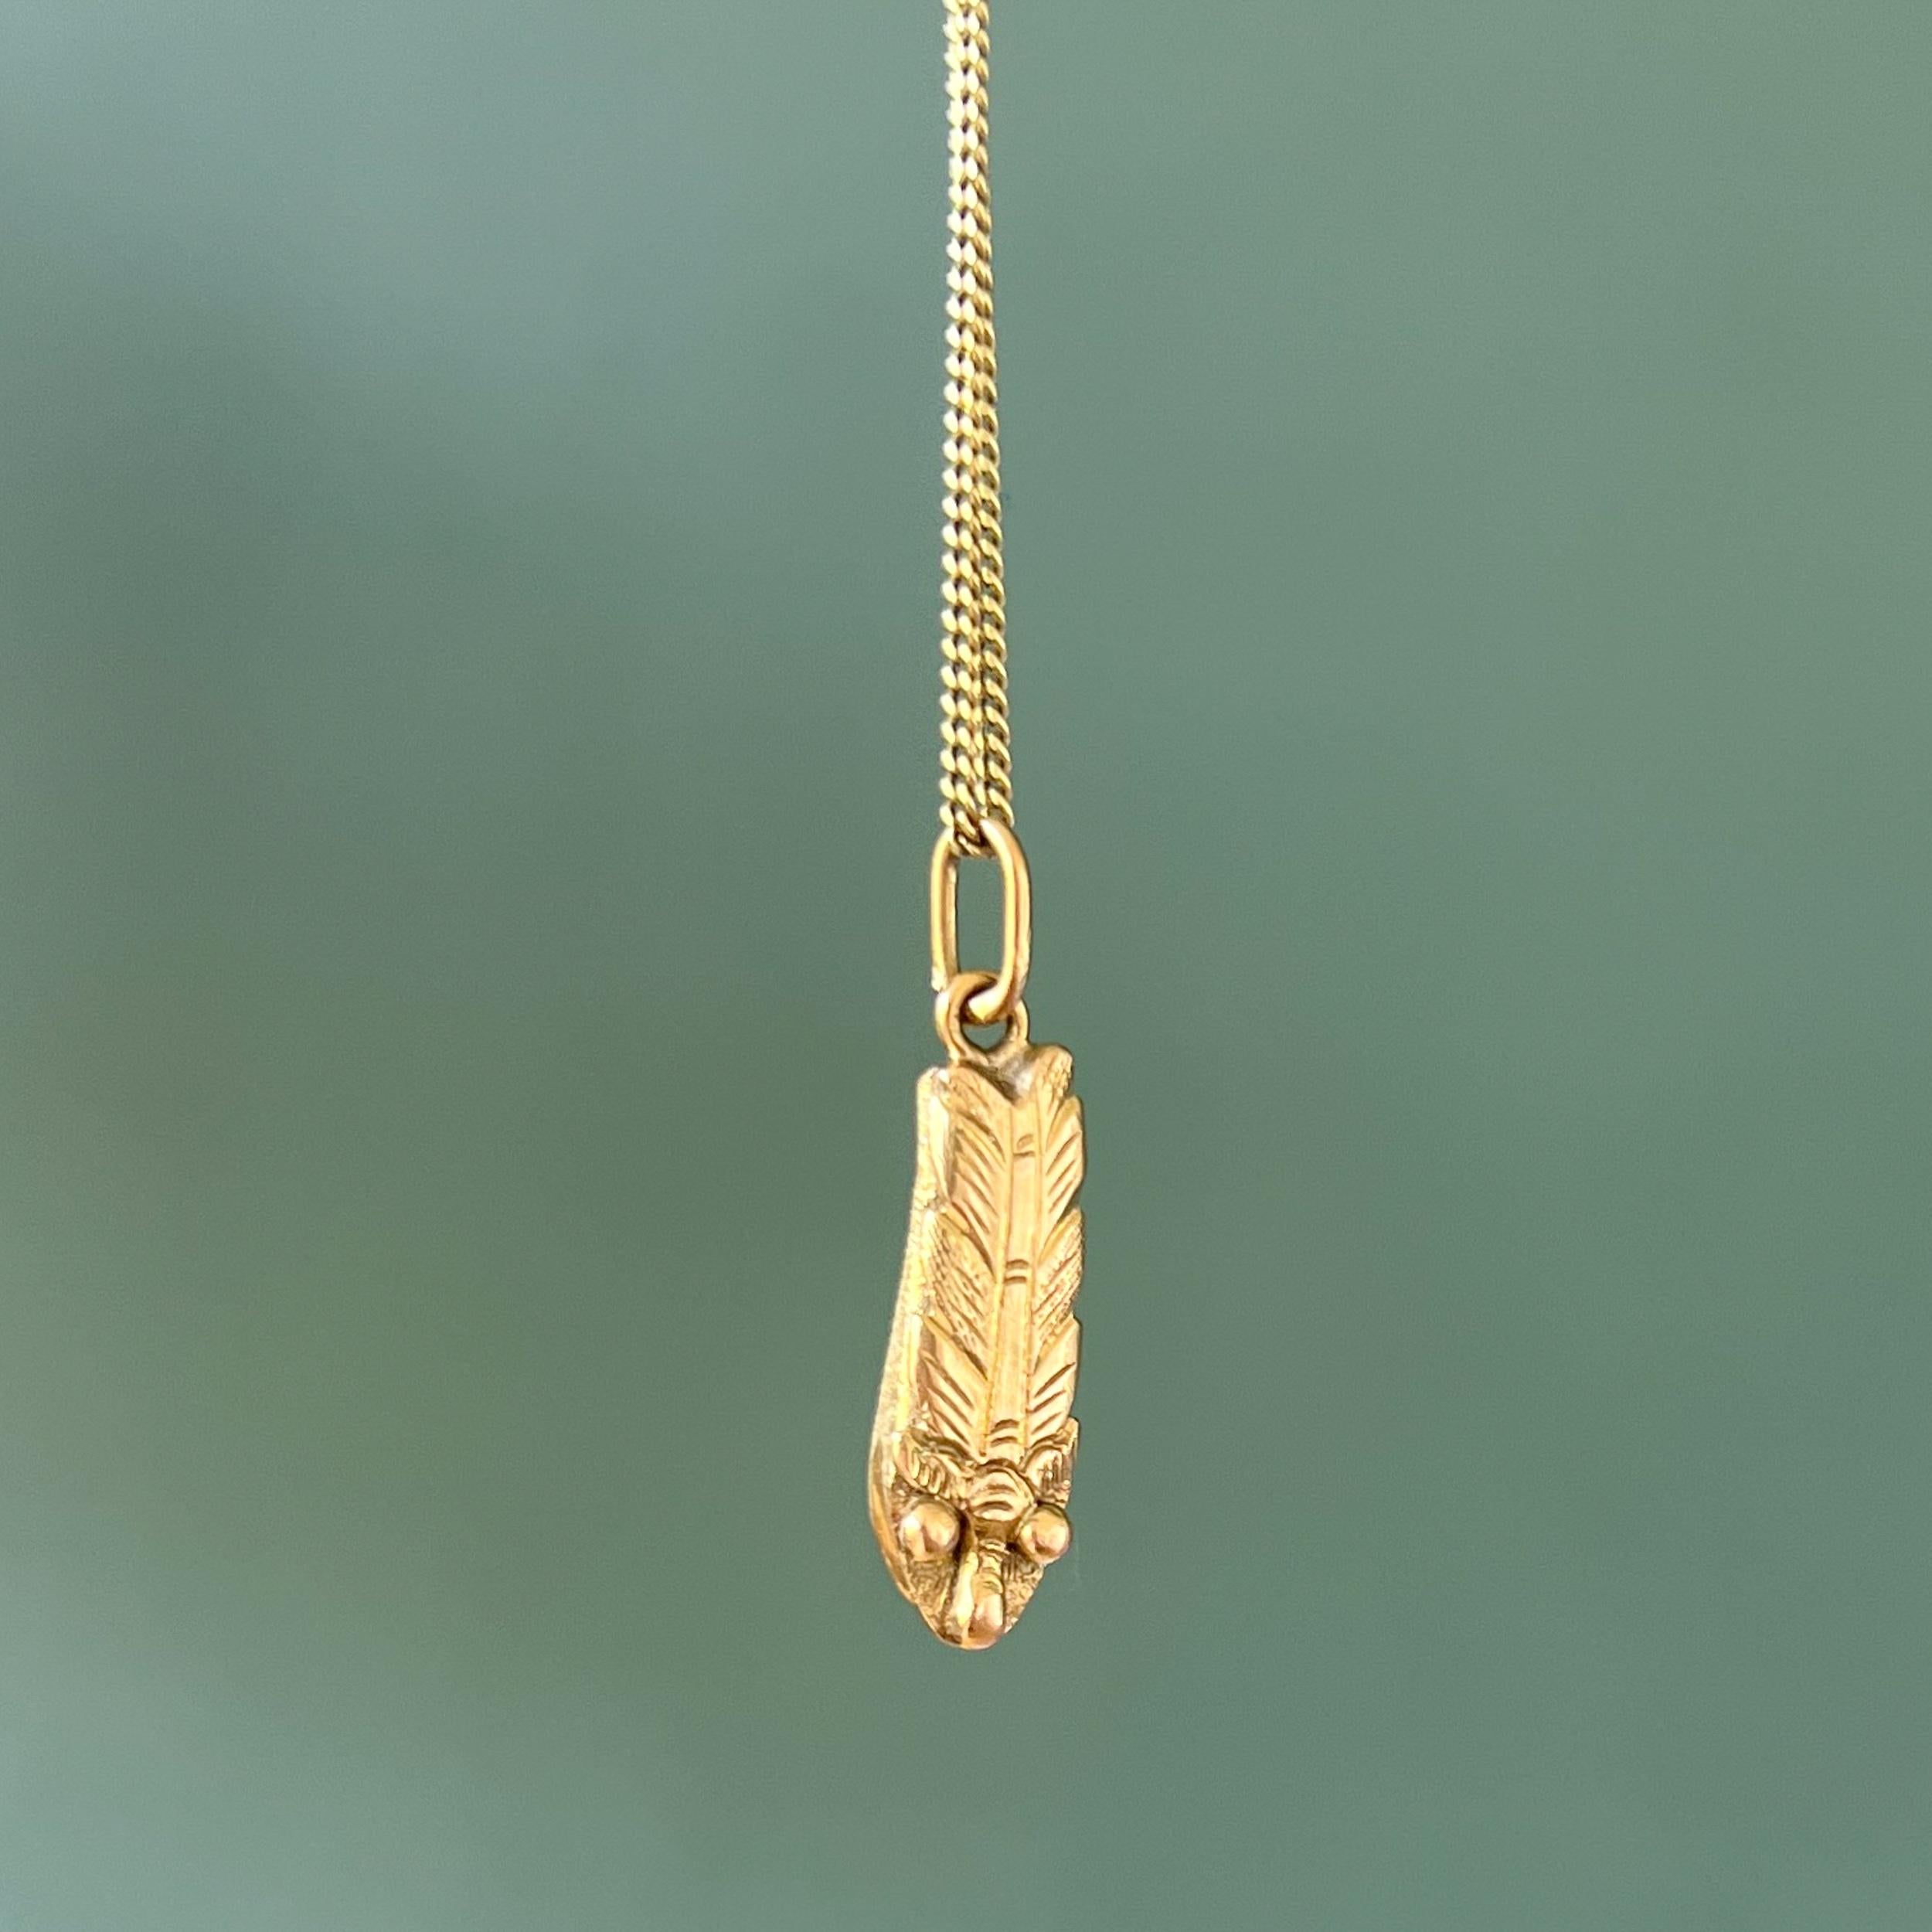 A vintage mid-century charm pendant designed into a fantasy animal creature. The charm is beautifully stylized and crafted in solid 14 karat gold. Charms are great to collect as wearable memories, it has a symbolic and often a sentimental value.